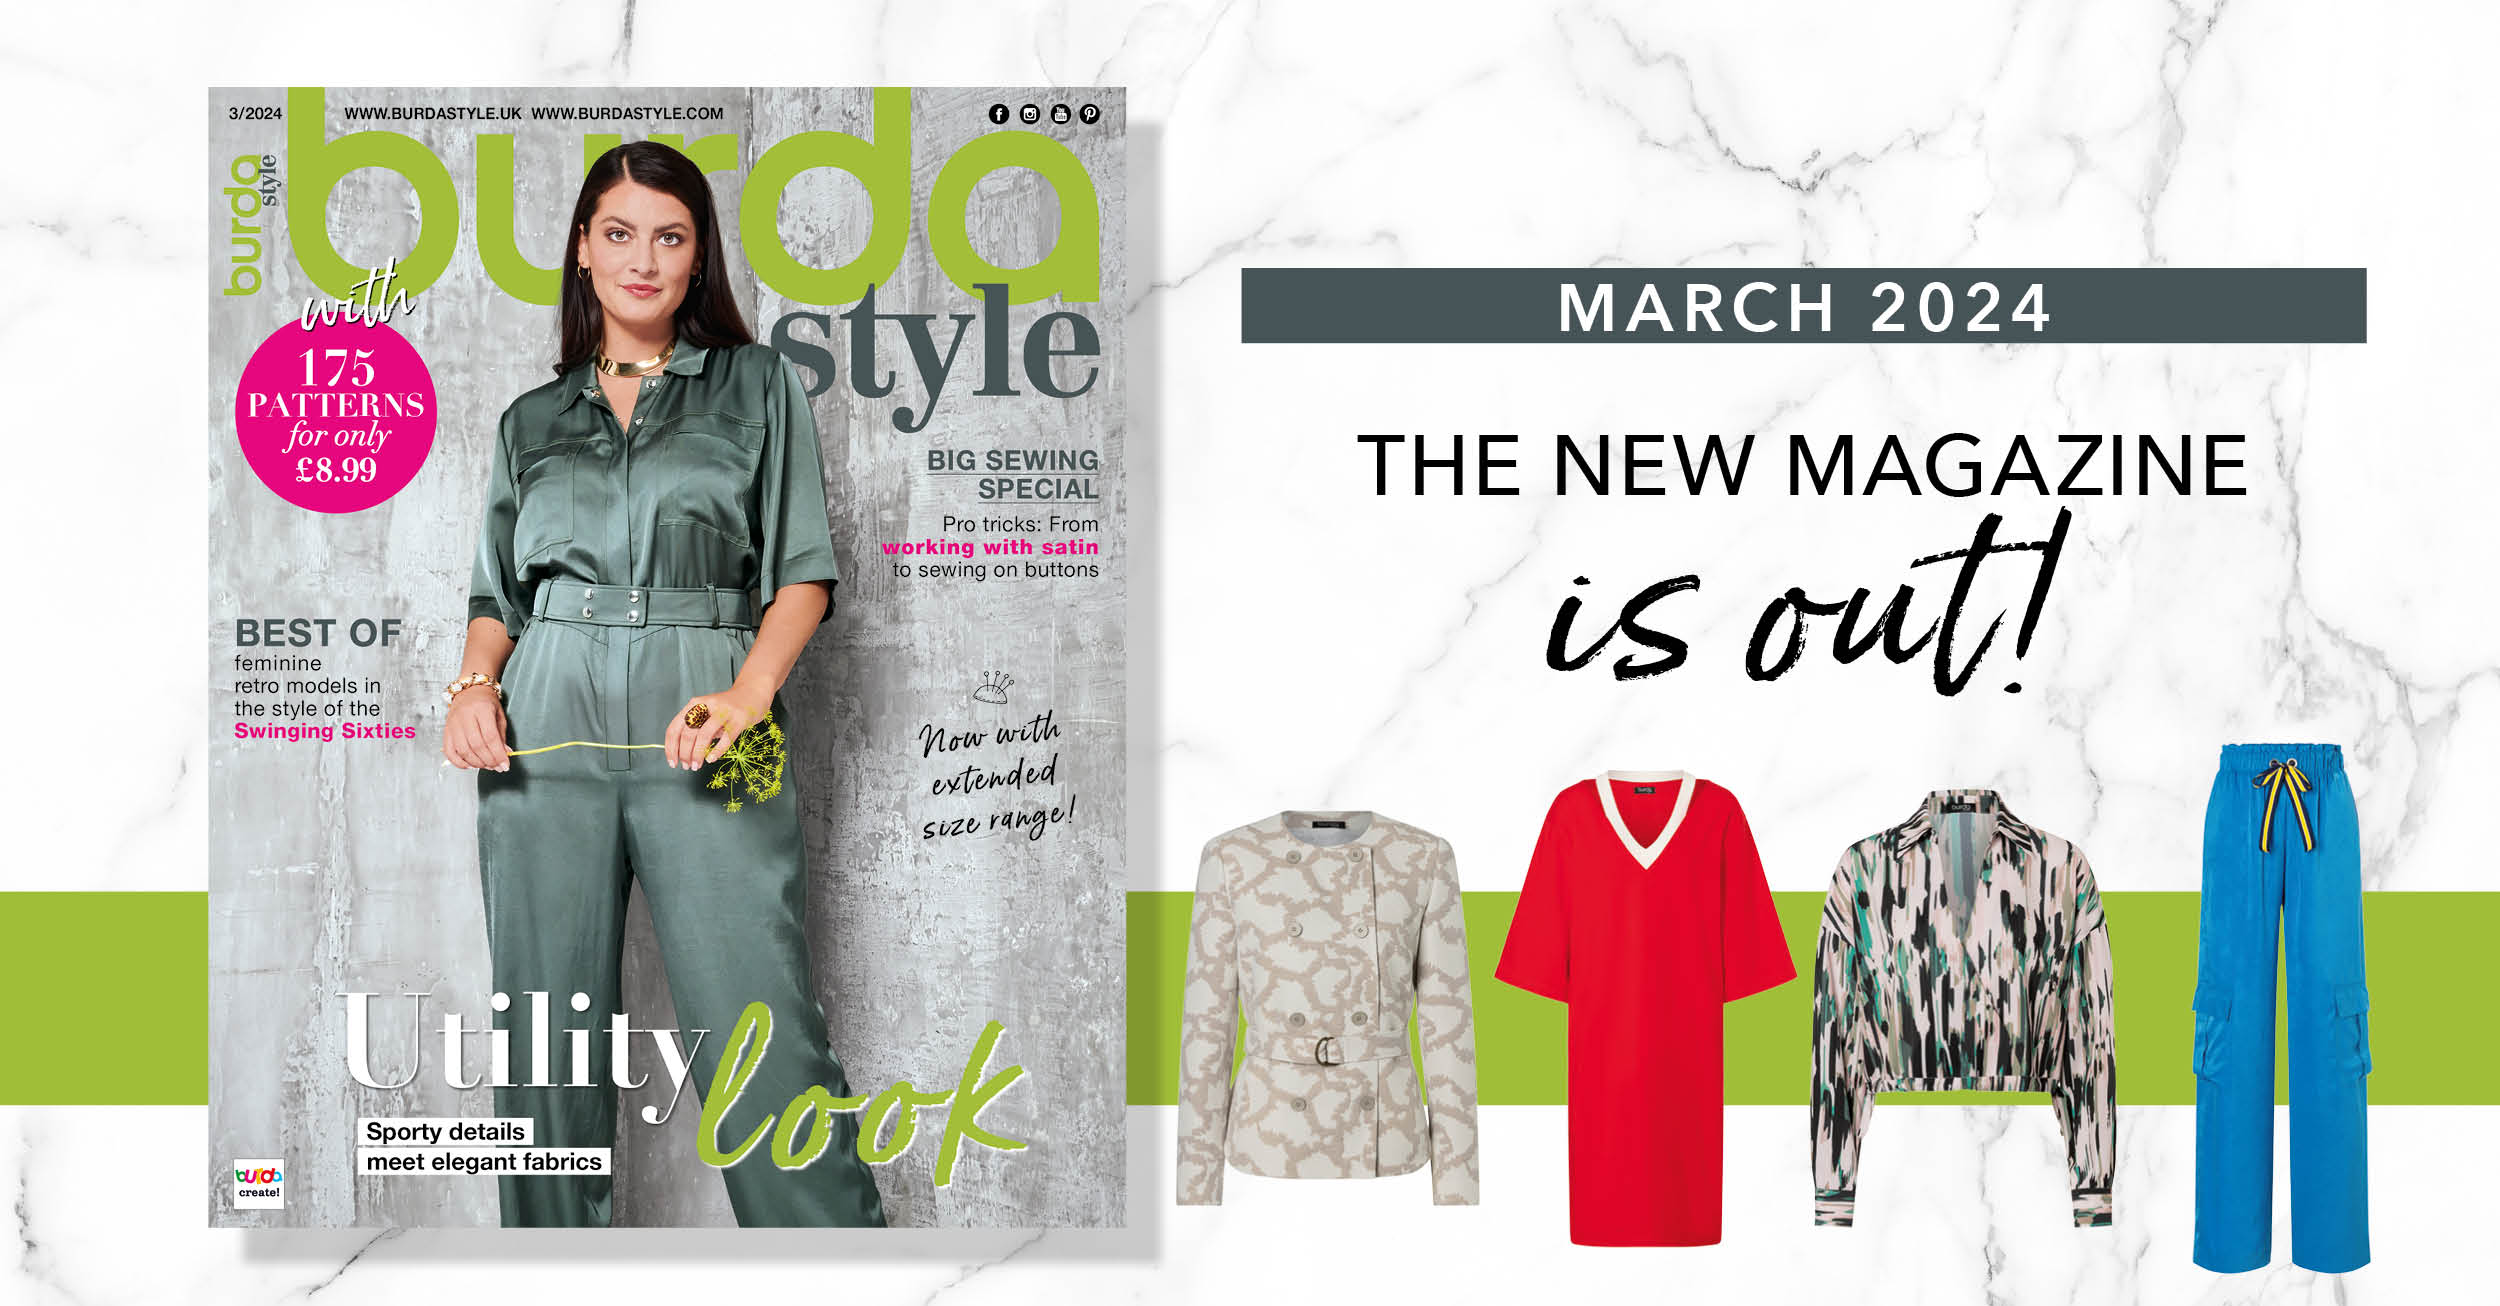 March 2024: The New Issue of Burda Style!